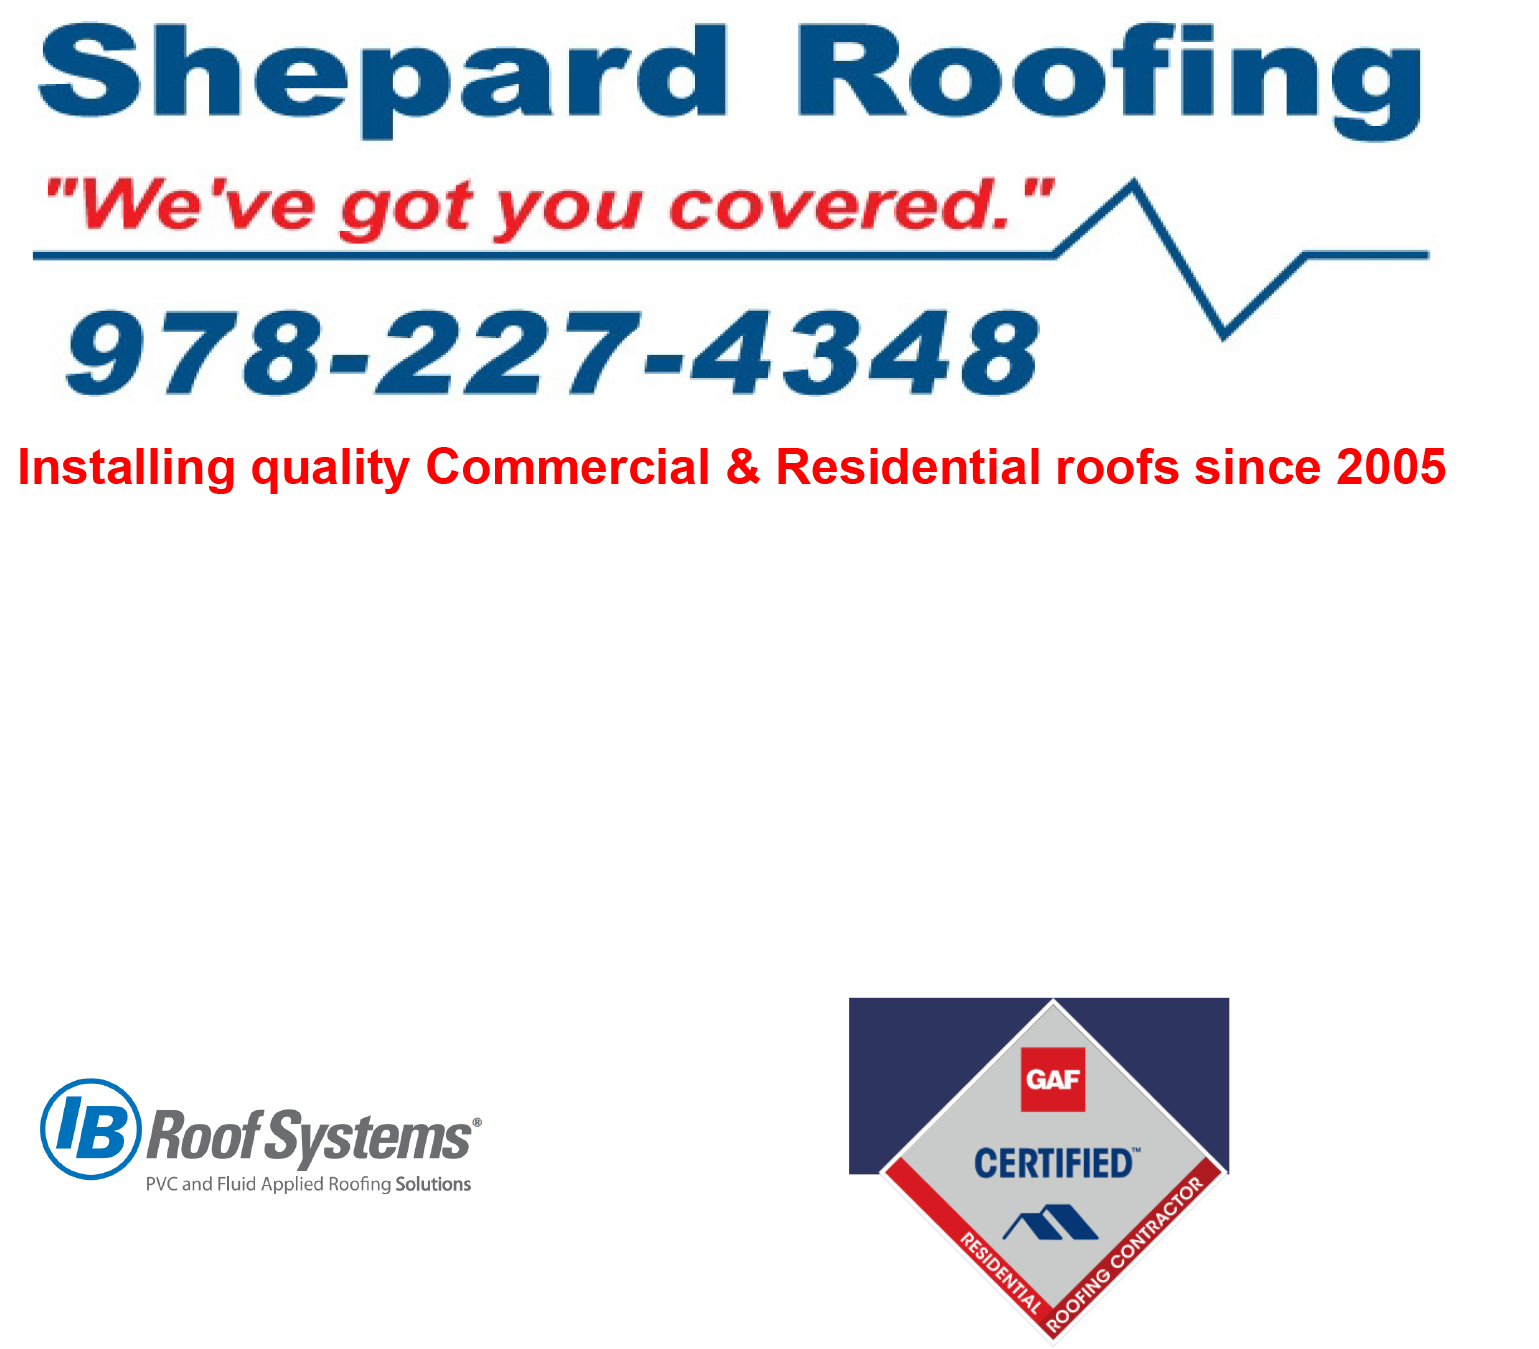 Gold Shepard Roofing